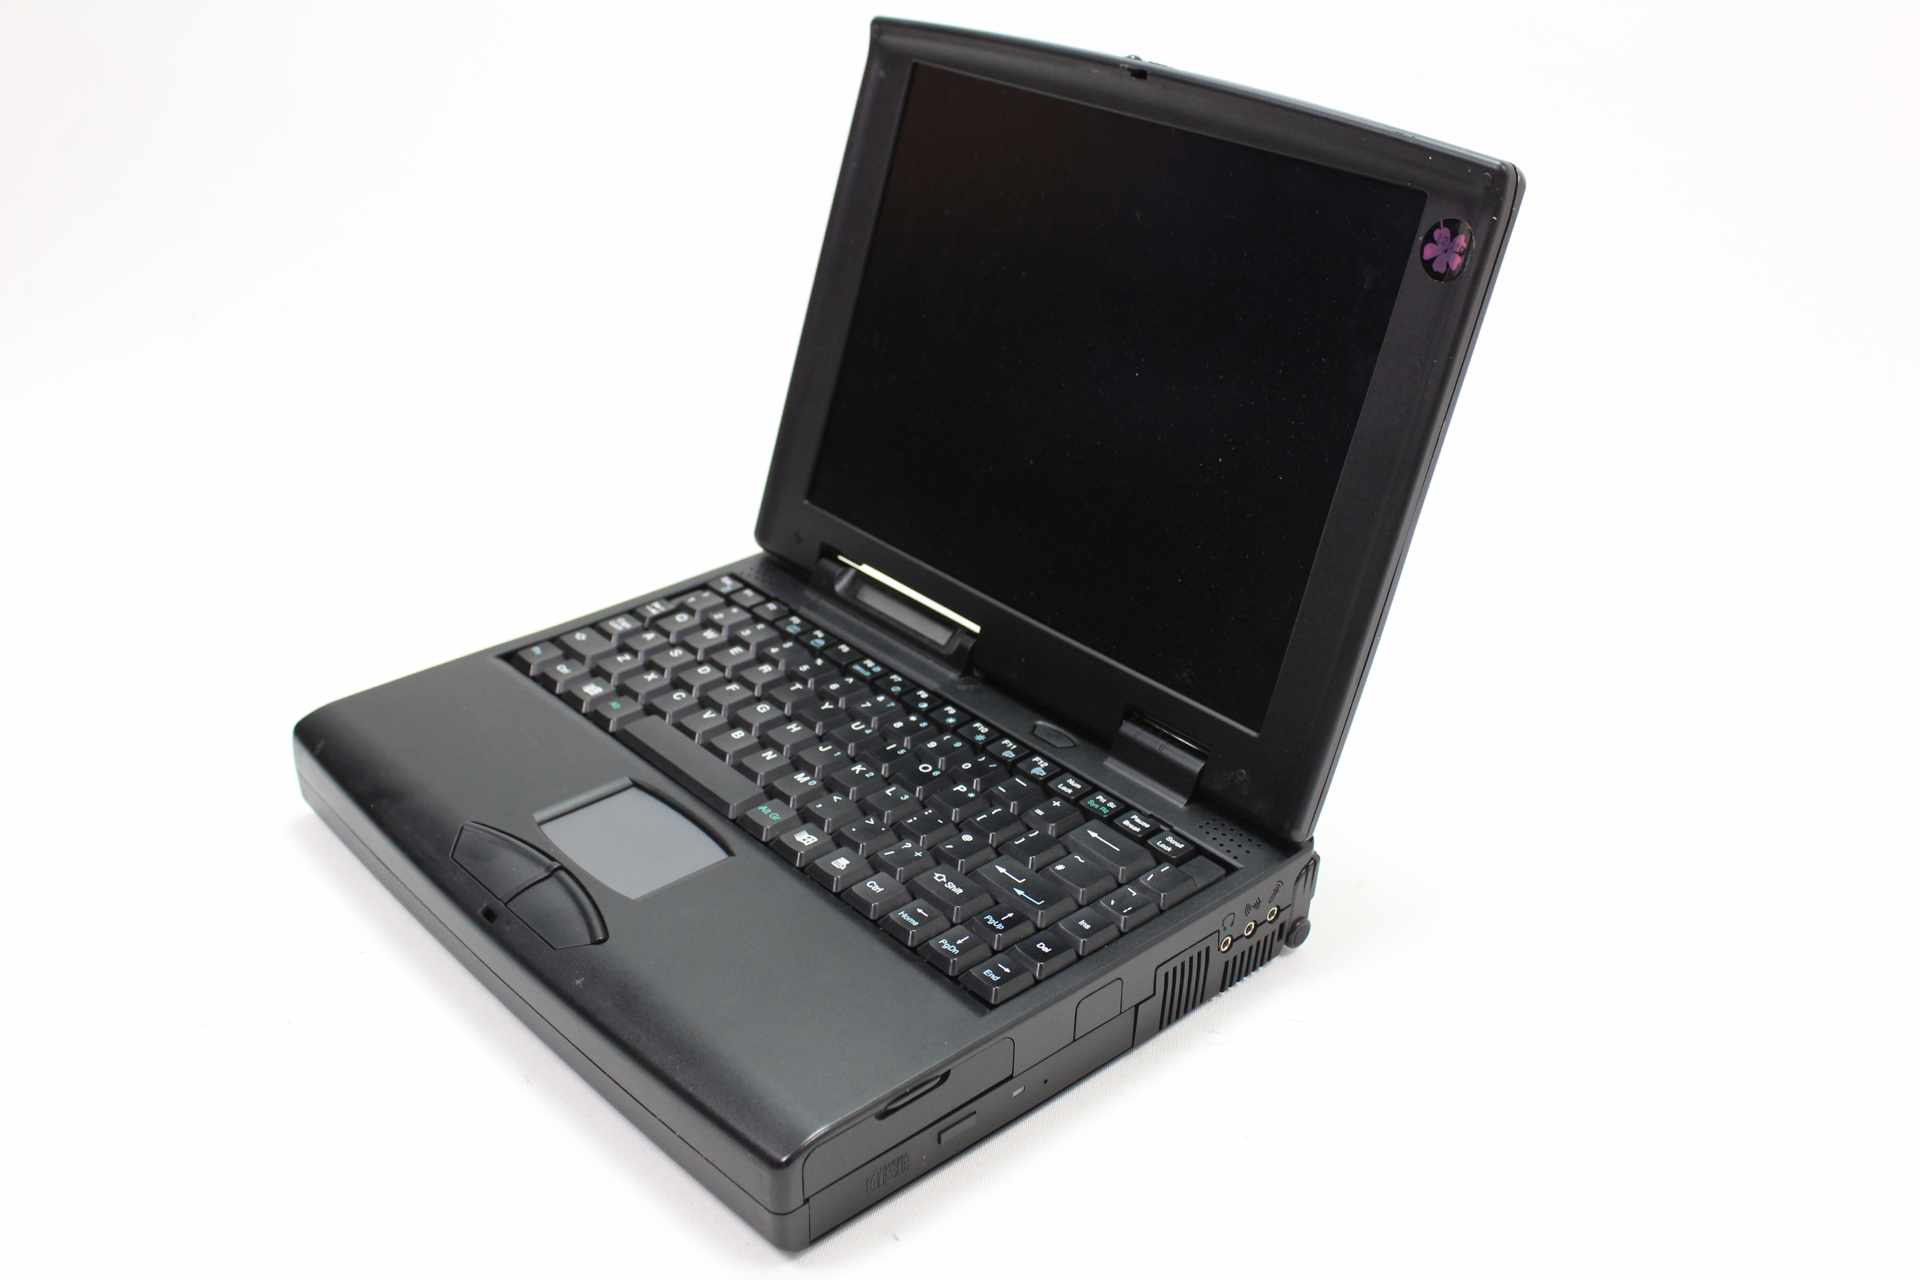 Notebook 6400AD